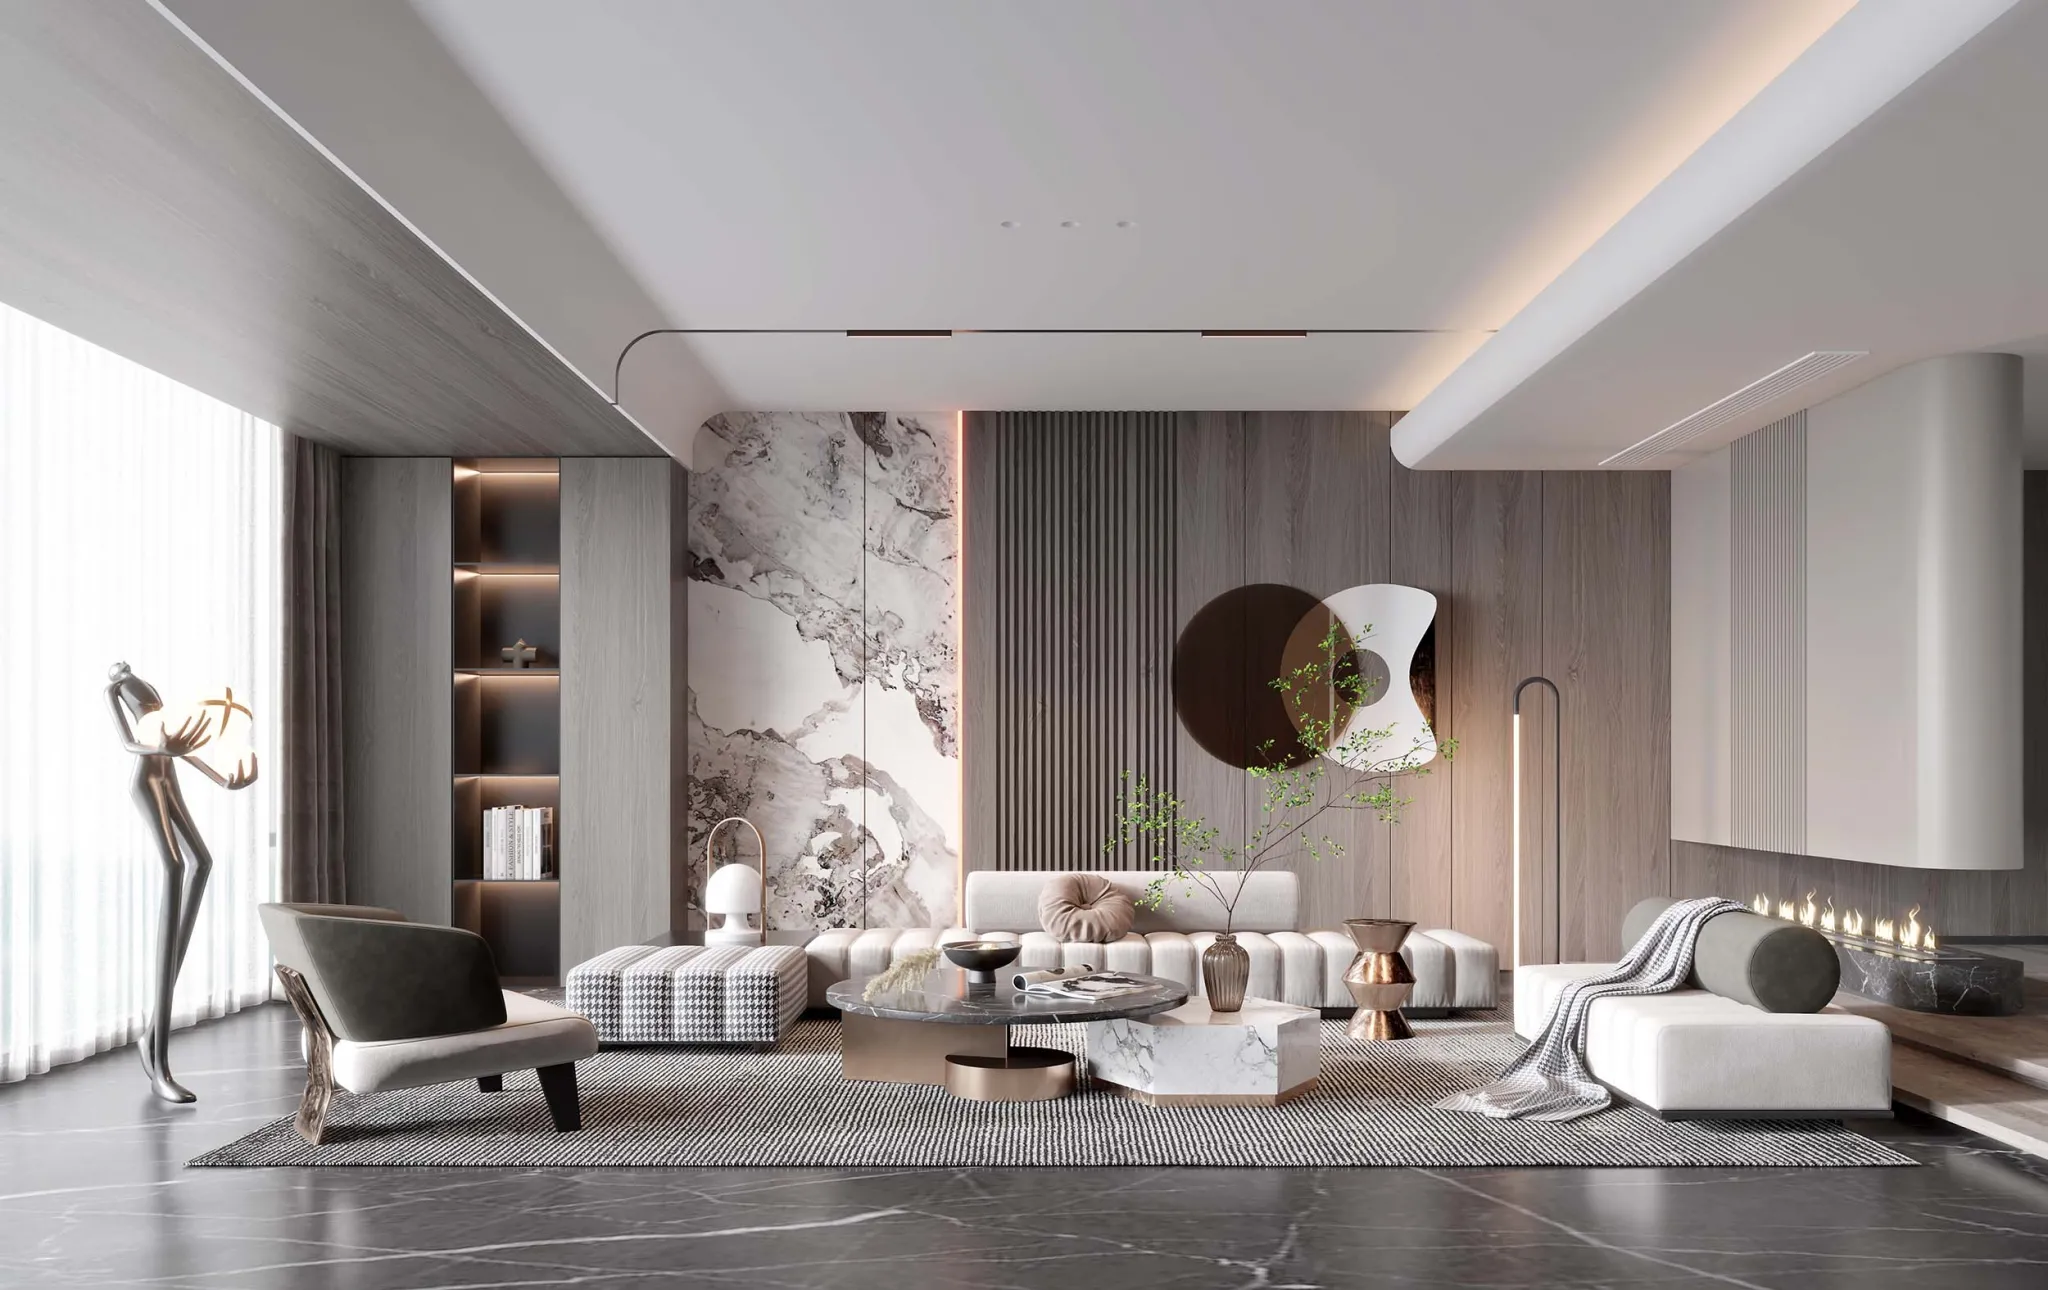 HOUSE SPACE 3D SCENES – LIVING ROOM – 0012